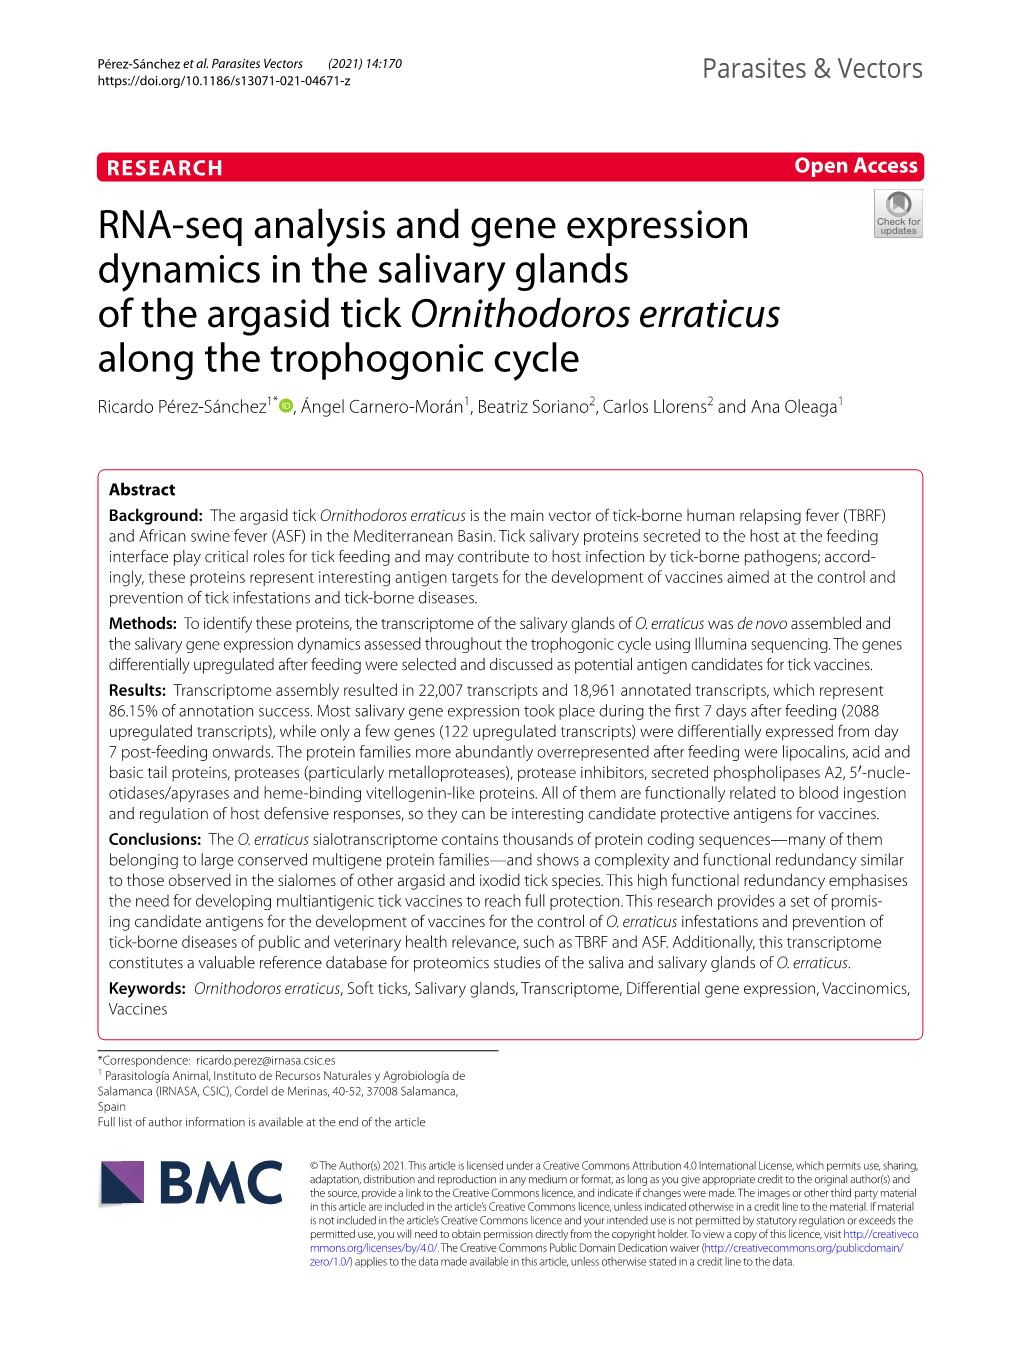 RNA-Seq Analysis and Gene Expression Dynamics in the Salivary